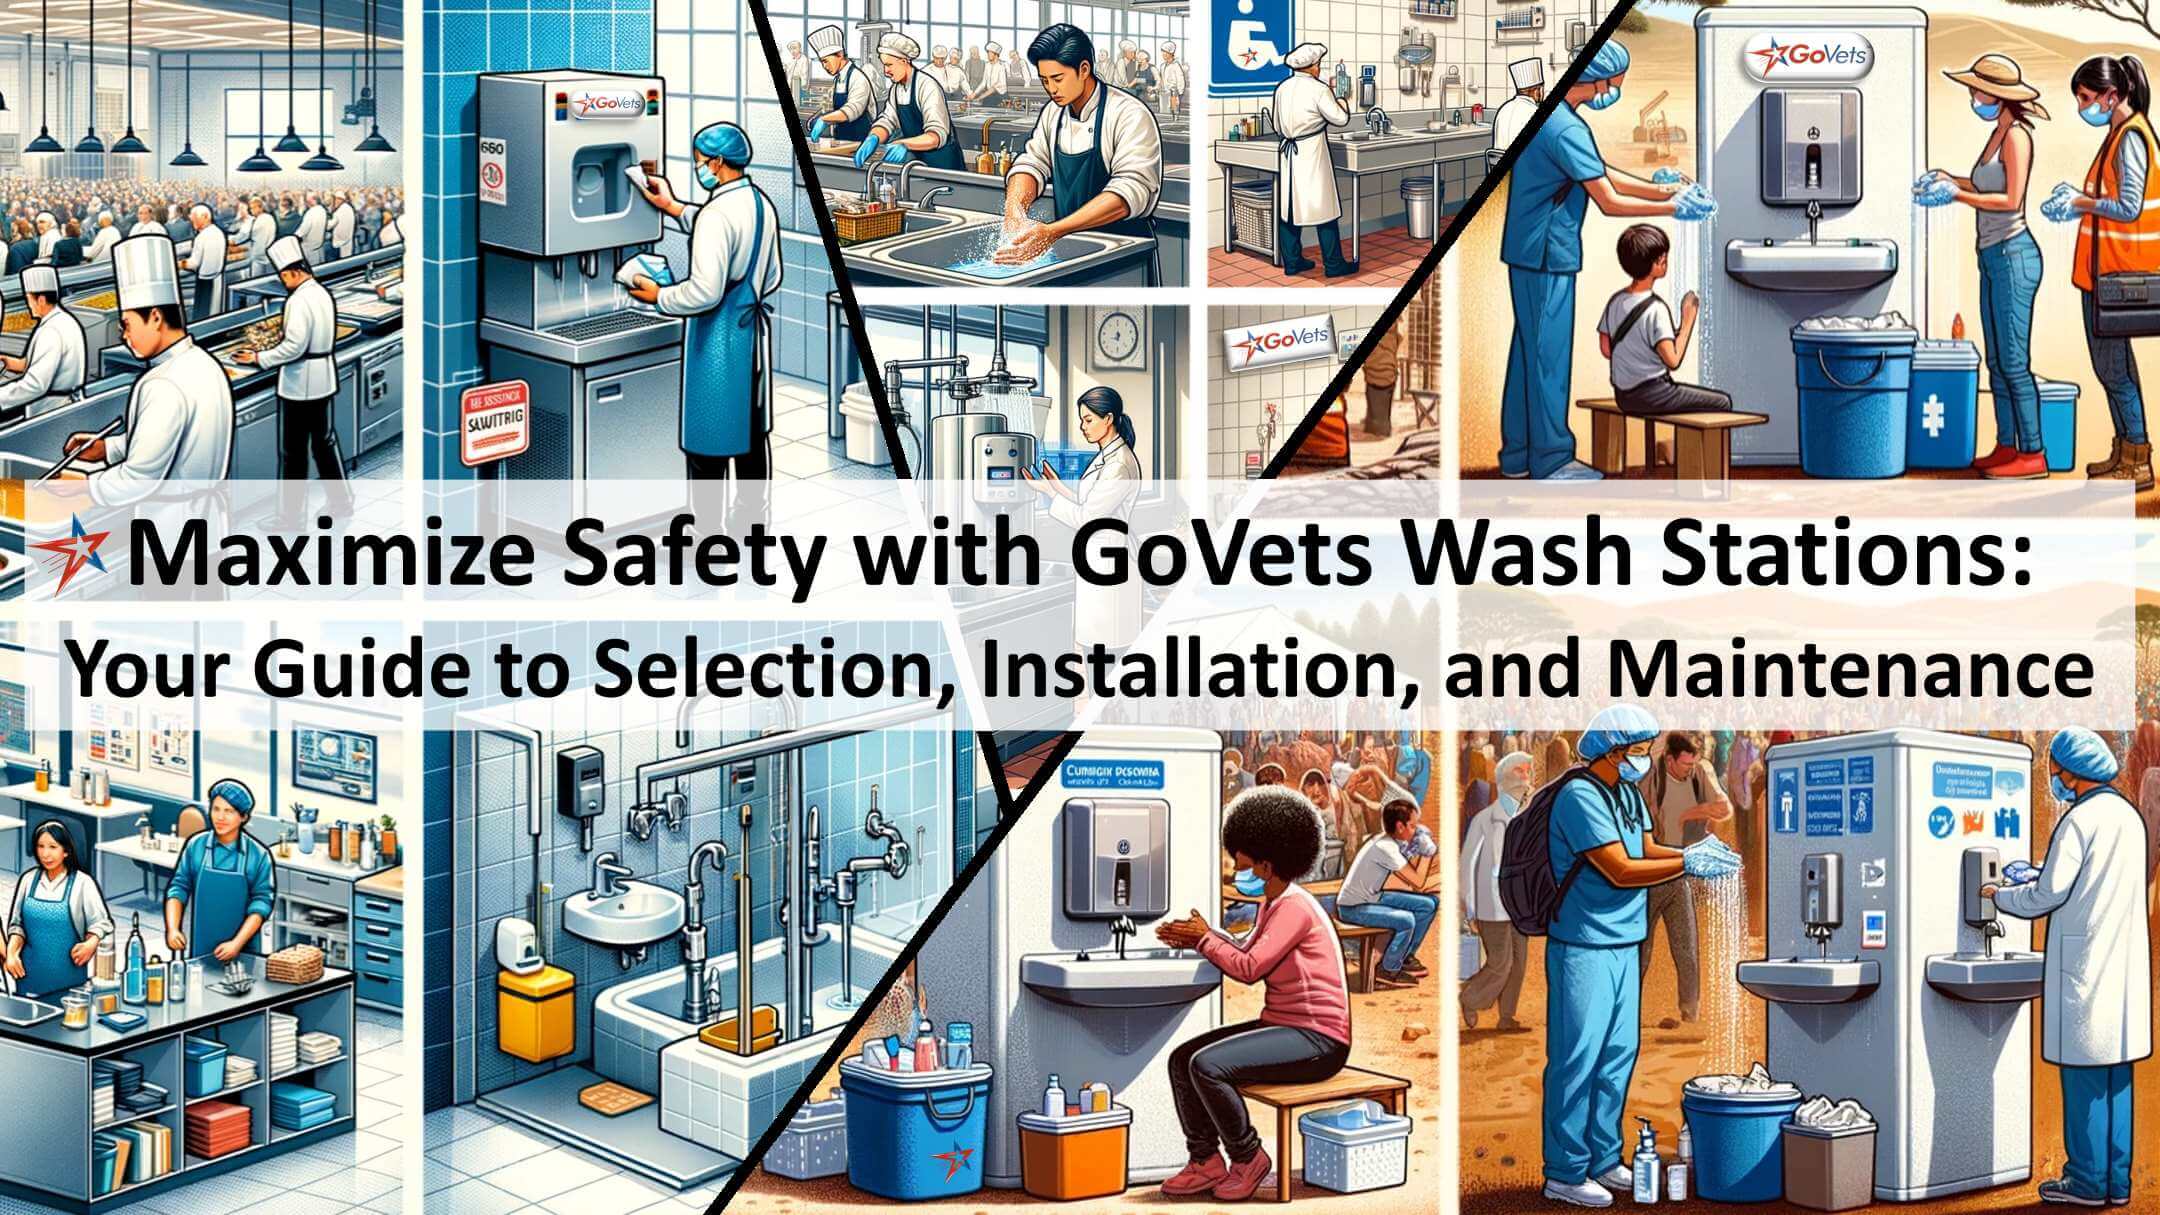 Maximize Safety with Wash Stations - Your Guide to Selection, Installation, and Maintenance